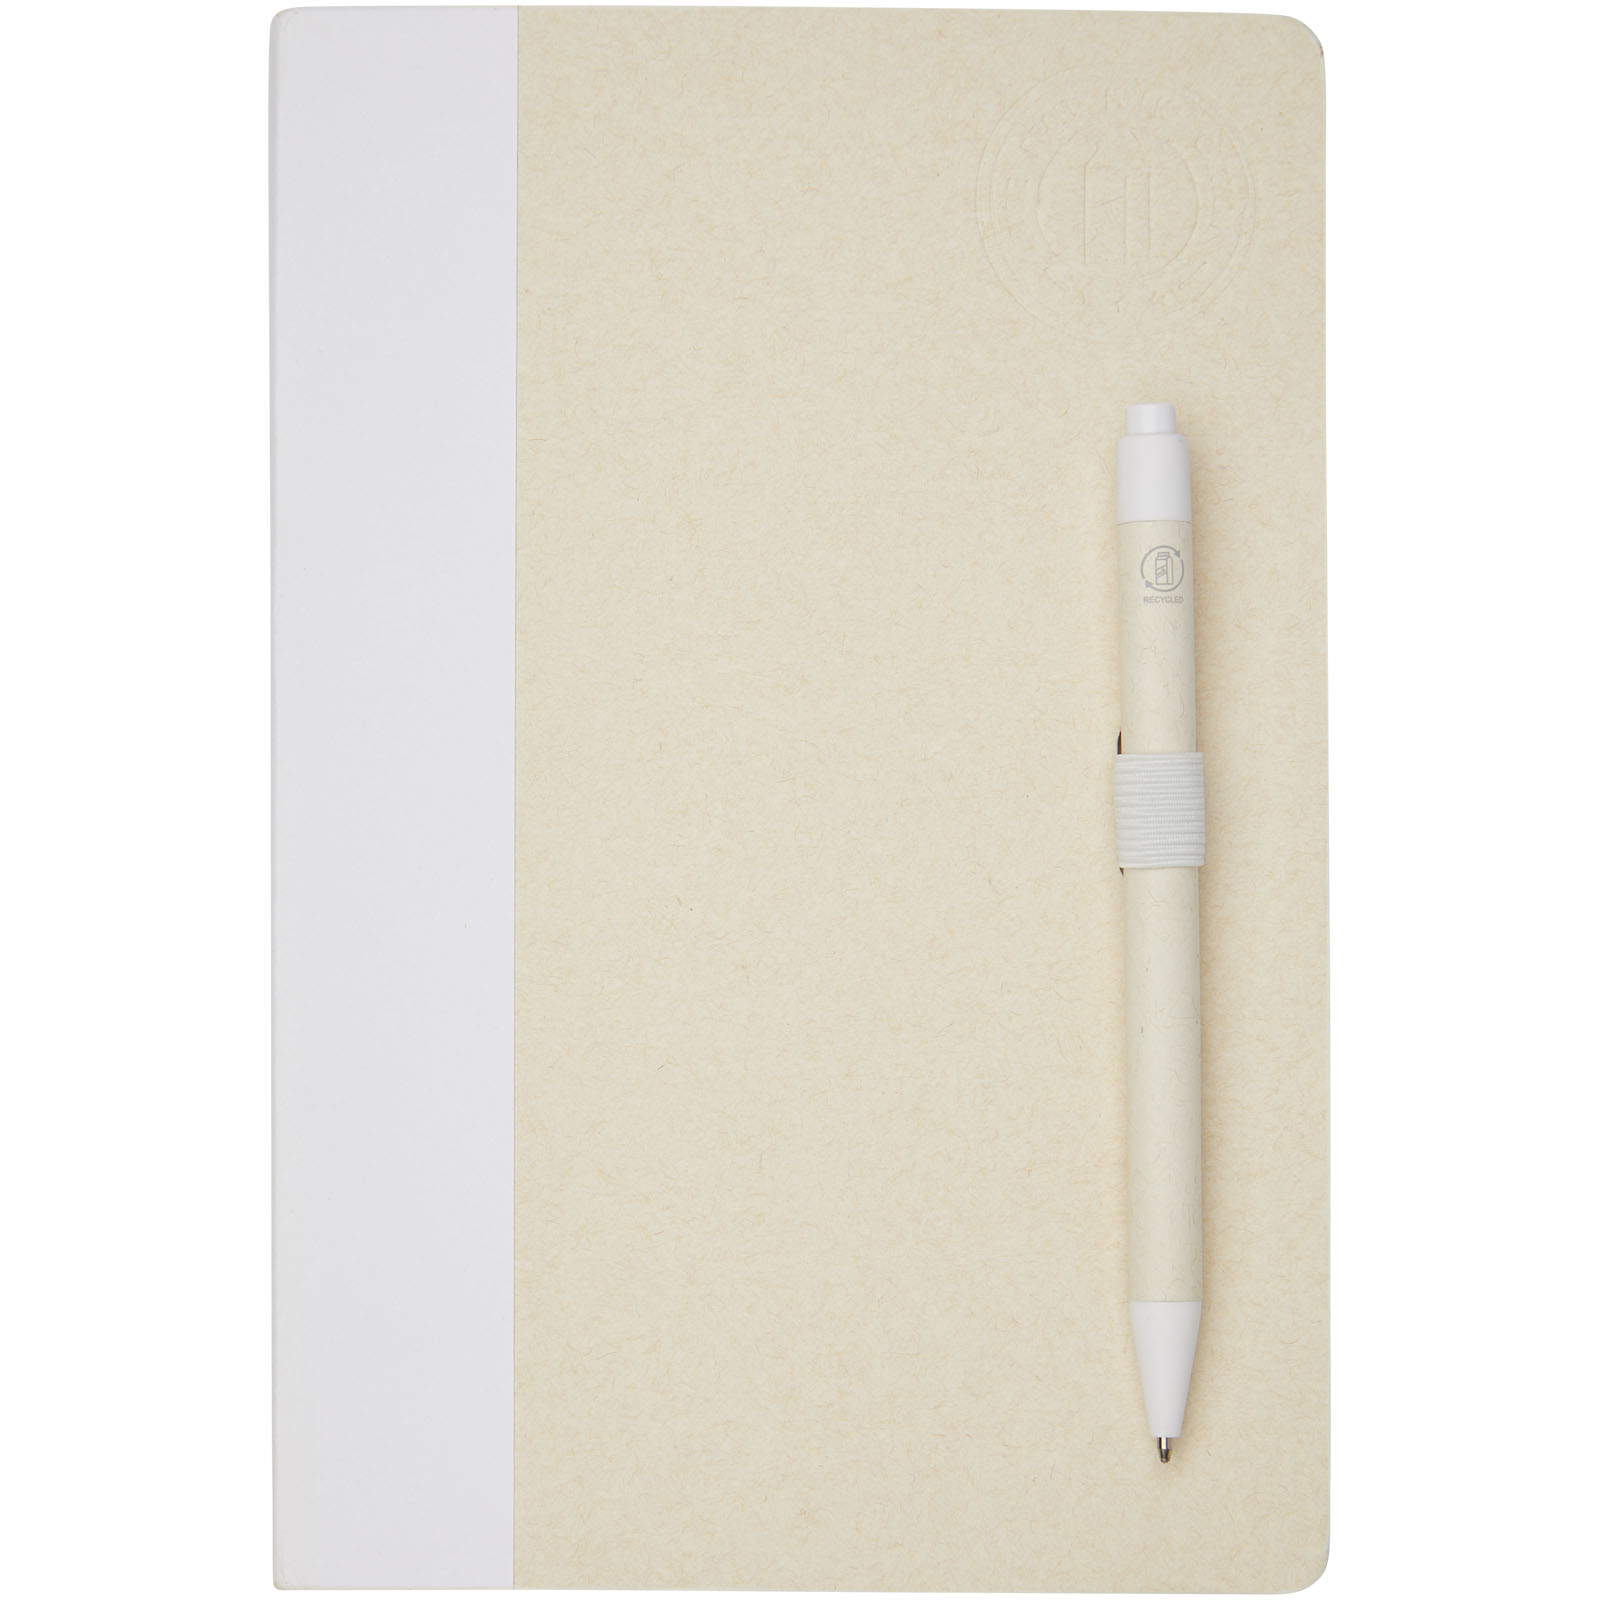 Advertising Hard cover notebooks - Dairy Dream A5 size reference recycled milk cartons notebook and ballpoint pen set - 1